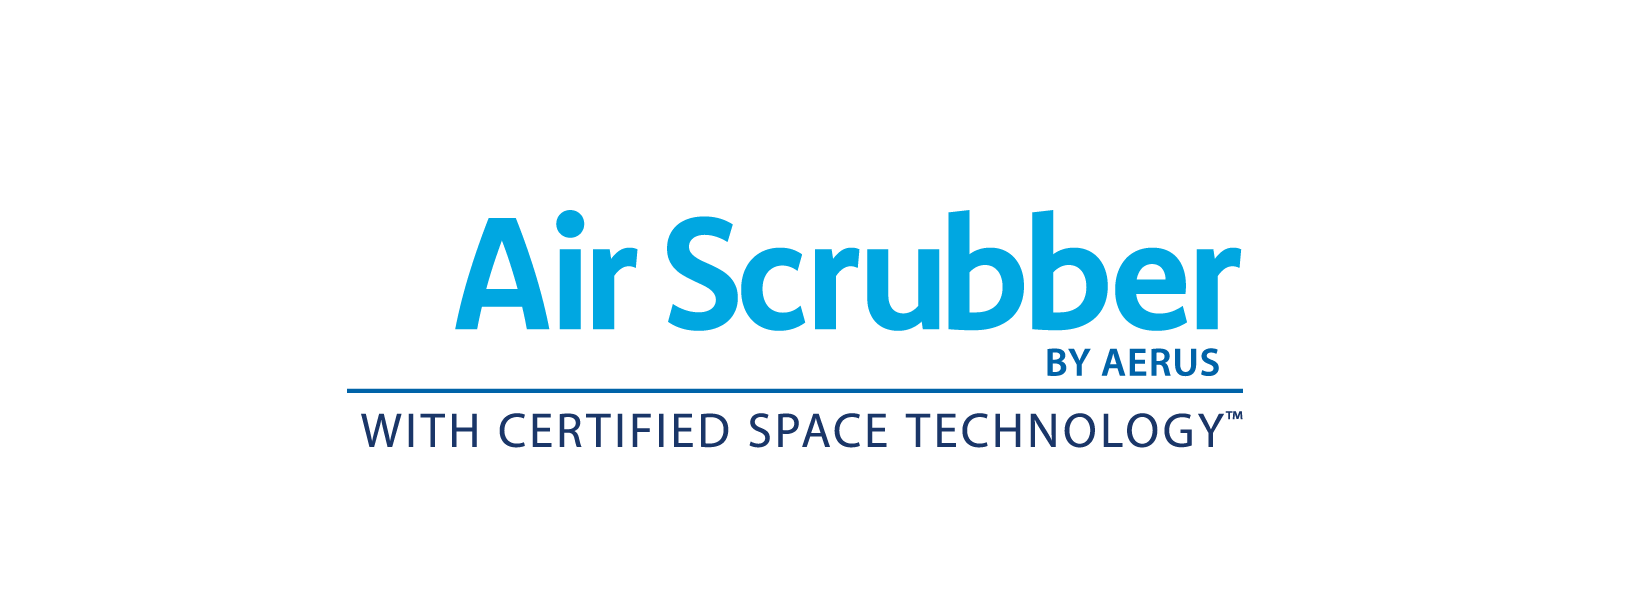 Air Scrubber by Aerus Installed by Grant Mechanical